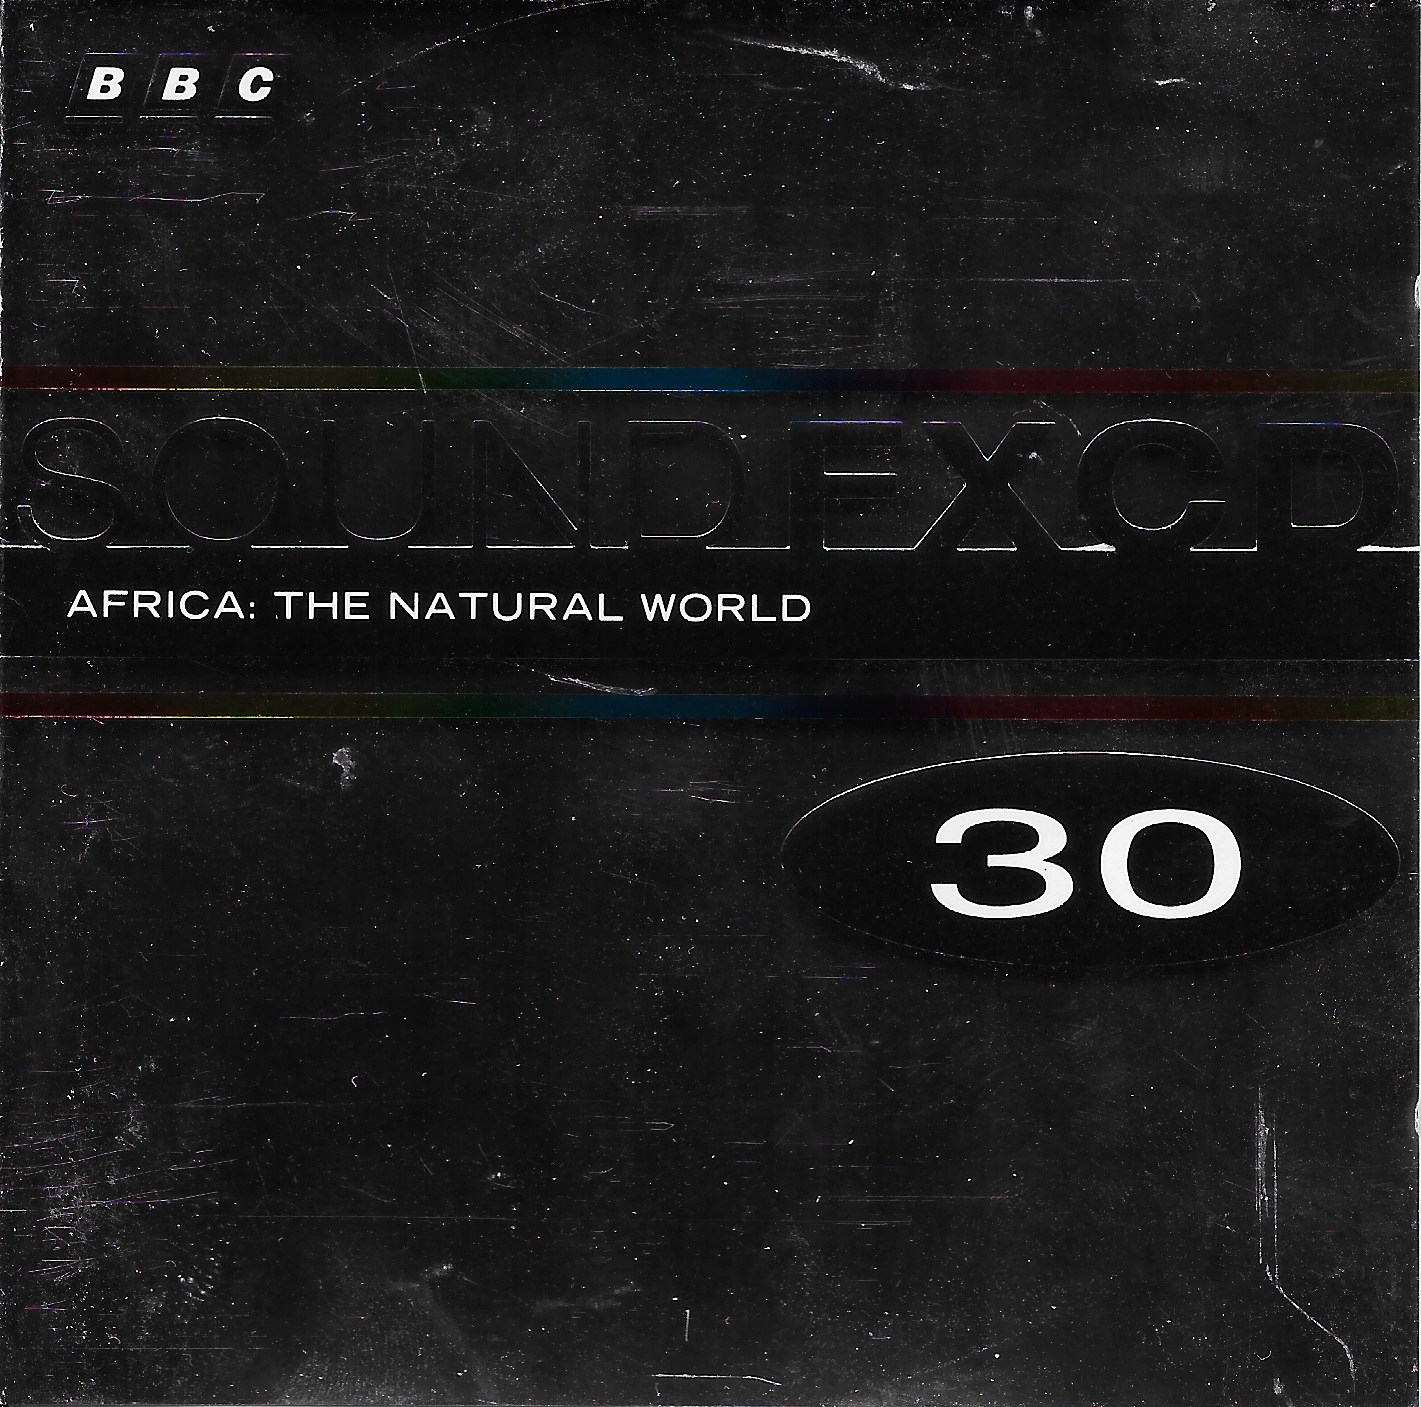 Picture of BBCCD SFX030 Africa: The natural world by artist Various from the BBC records and Tapes library